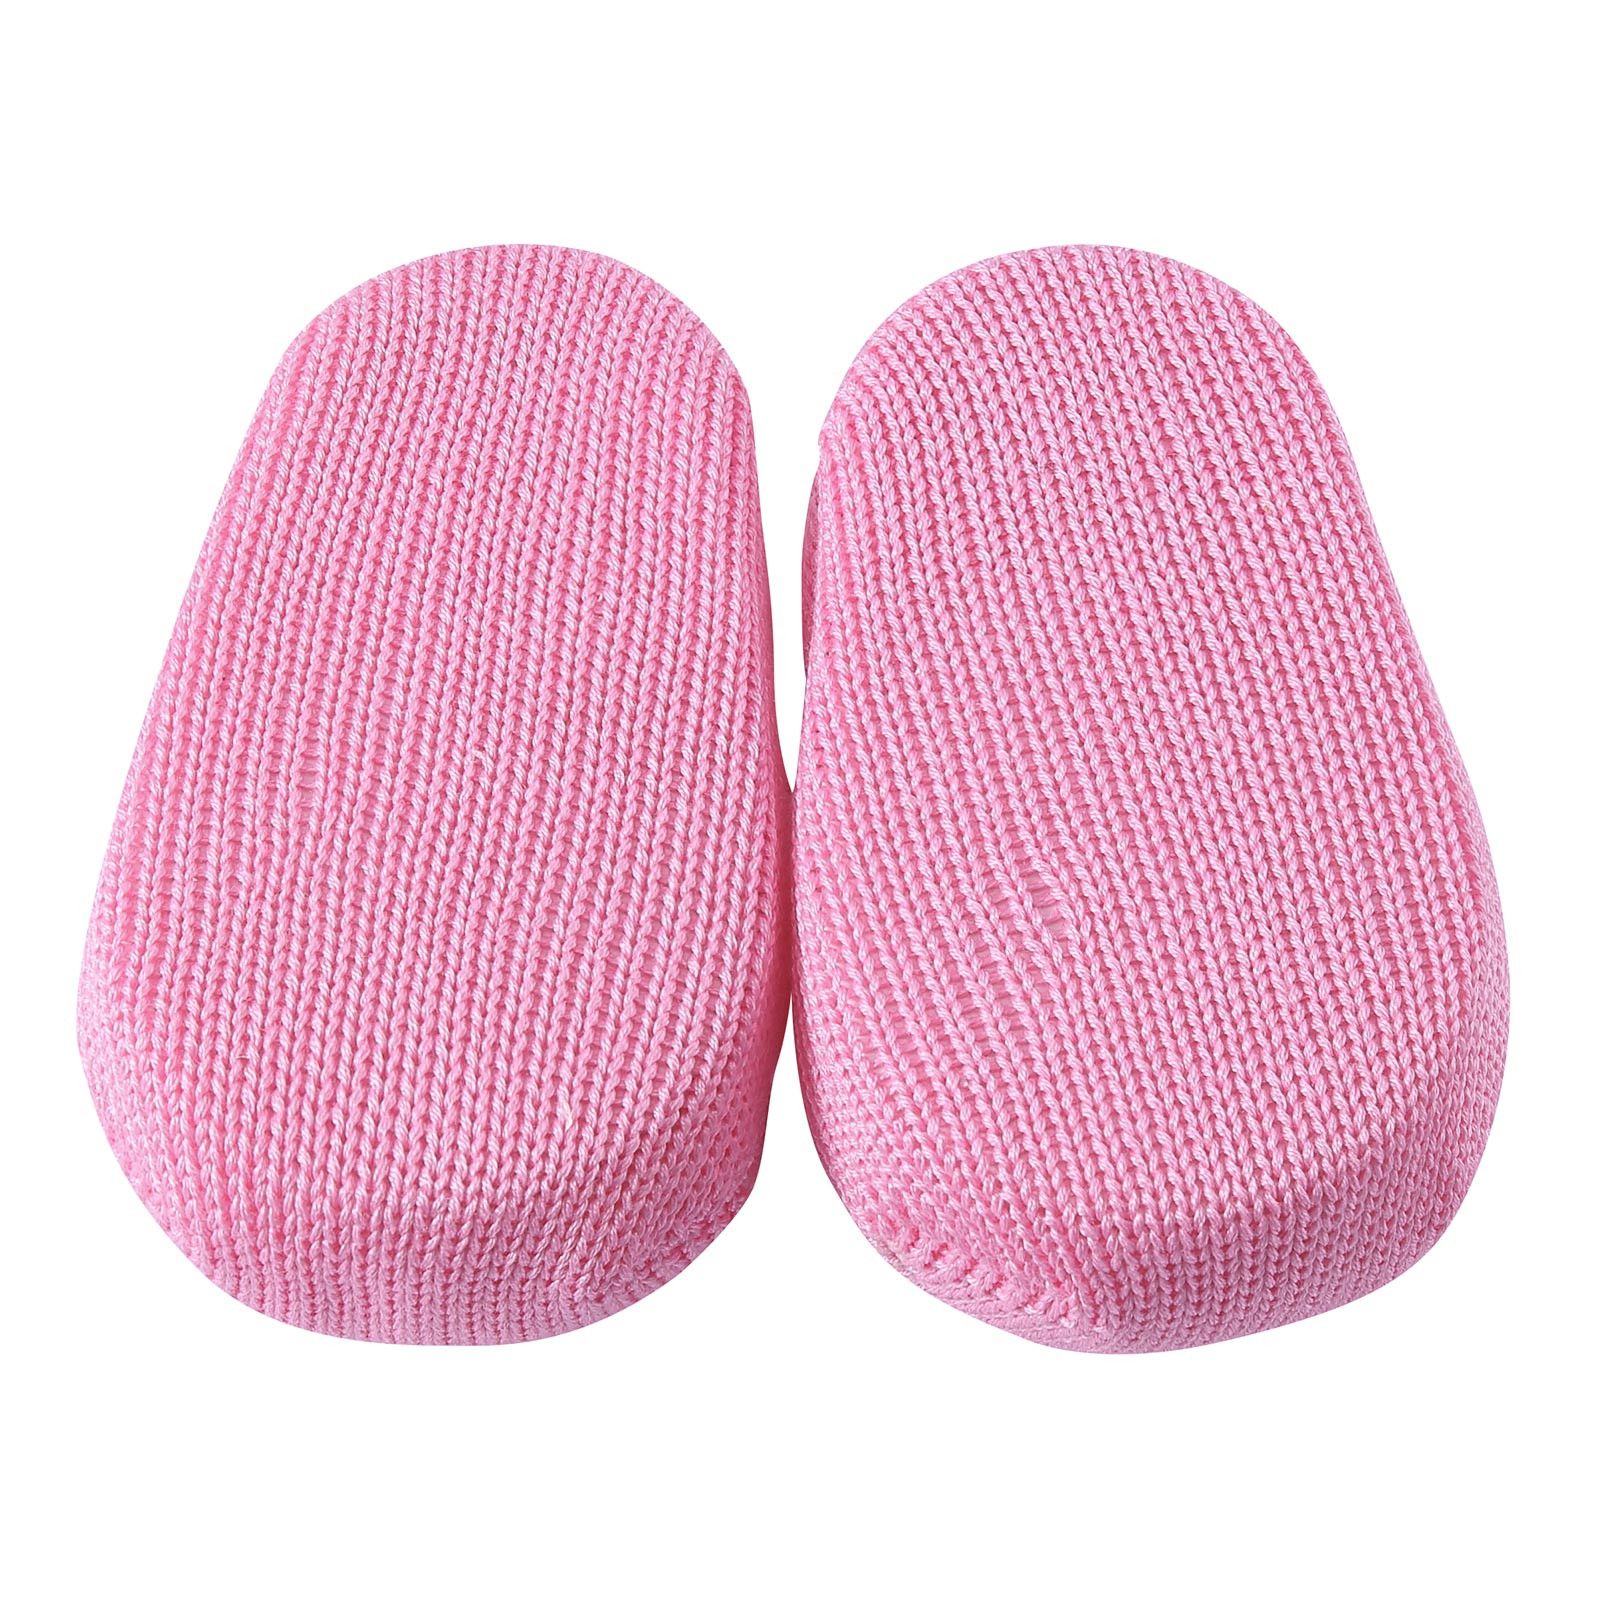 Baby Pink Lace Trims Knitted Cotton Shoes - CÉMAROSE | Children's Fashion Store - 4